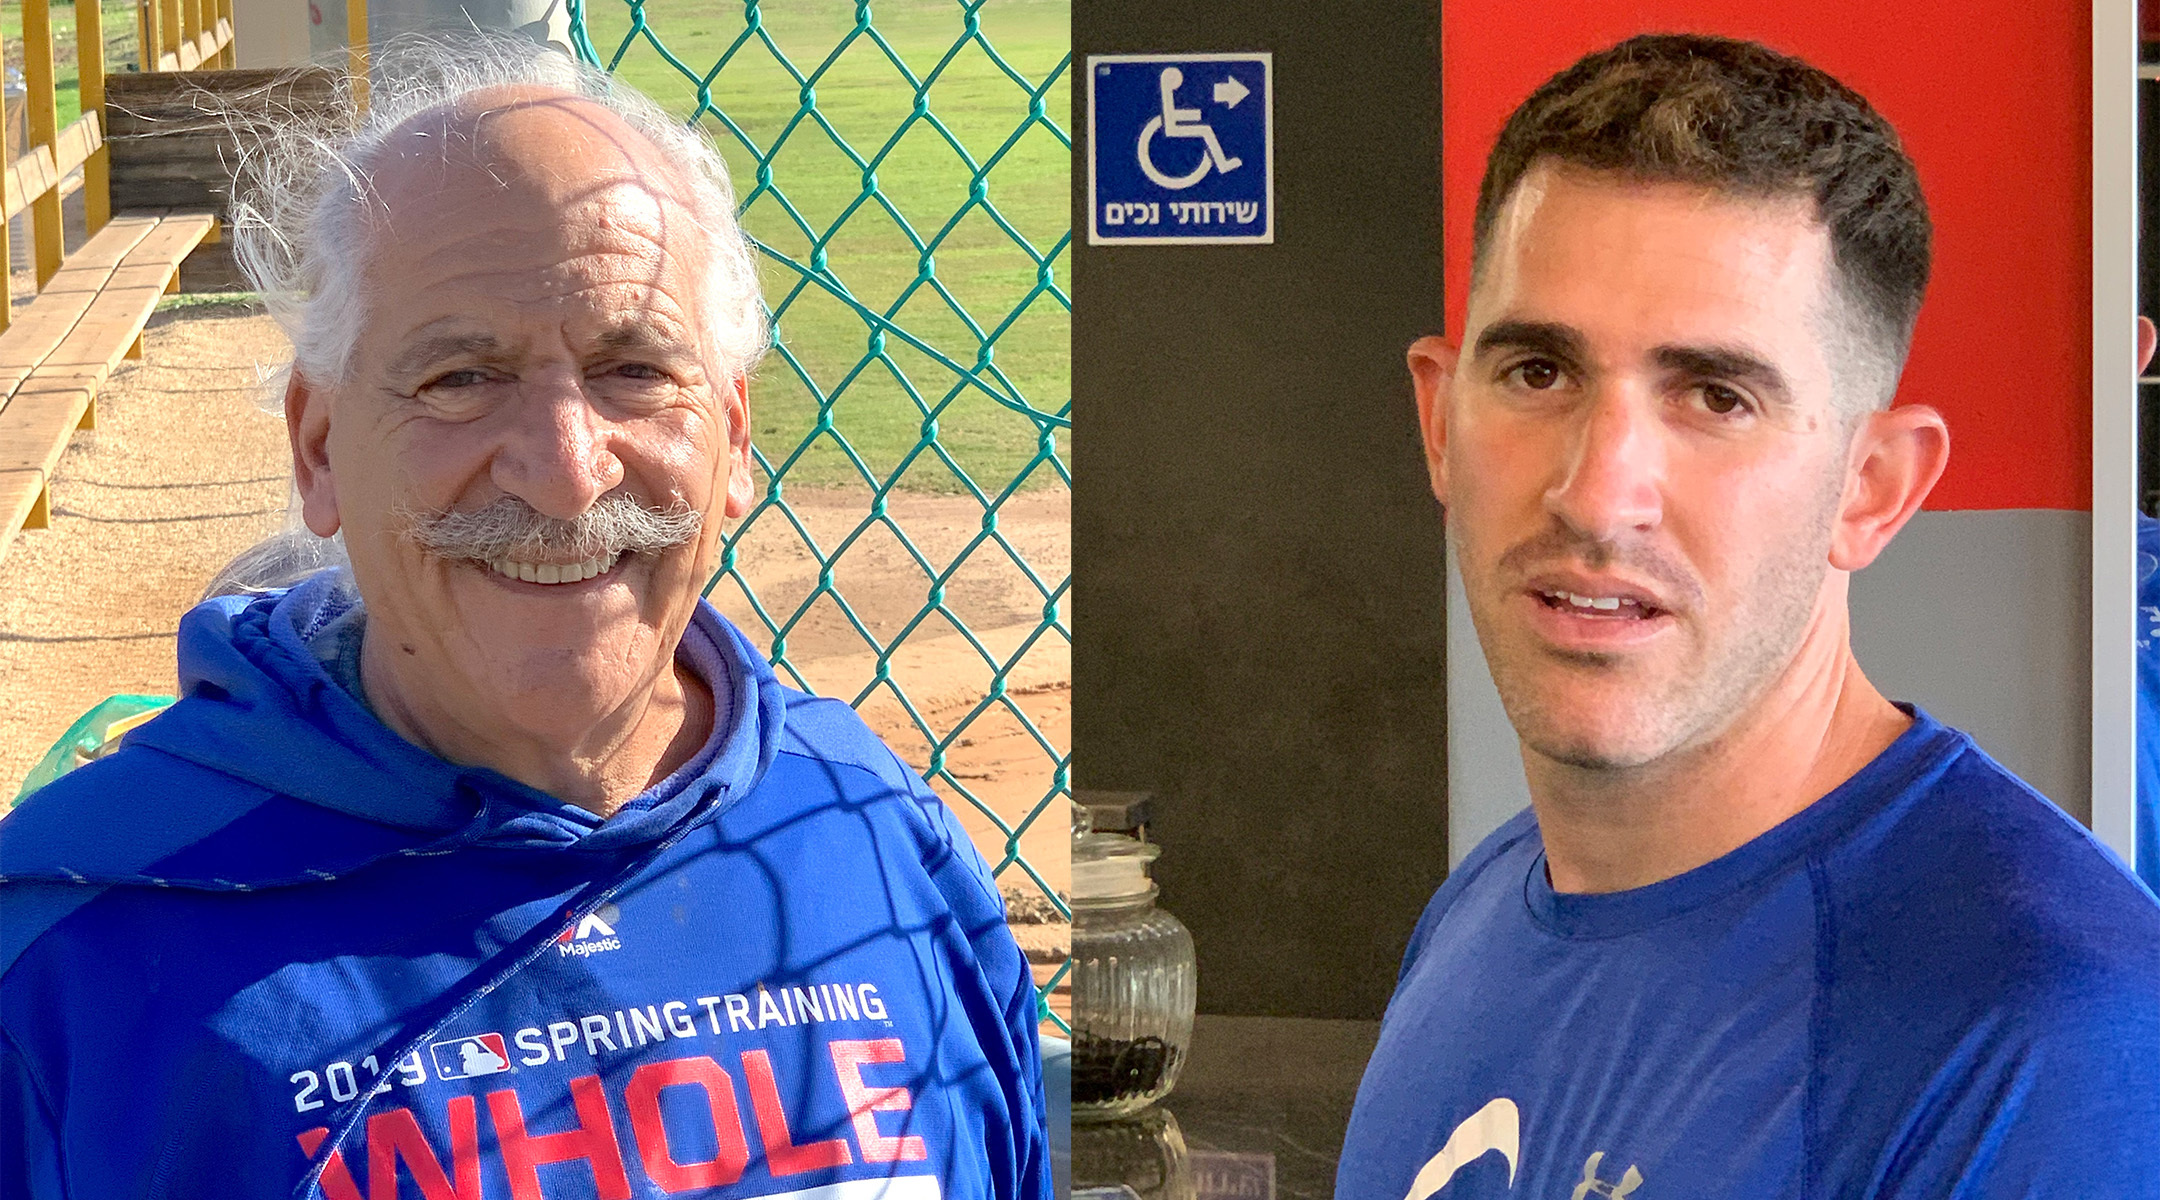 David Leichman, left, stands behind the backstop at the baseball field he helped build at Kibbutz Gezer in Israel, where his son Alon, right, learned the game that has brought him to the major leagues. (Elli Wohlgelernter)